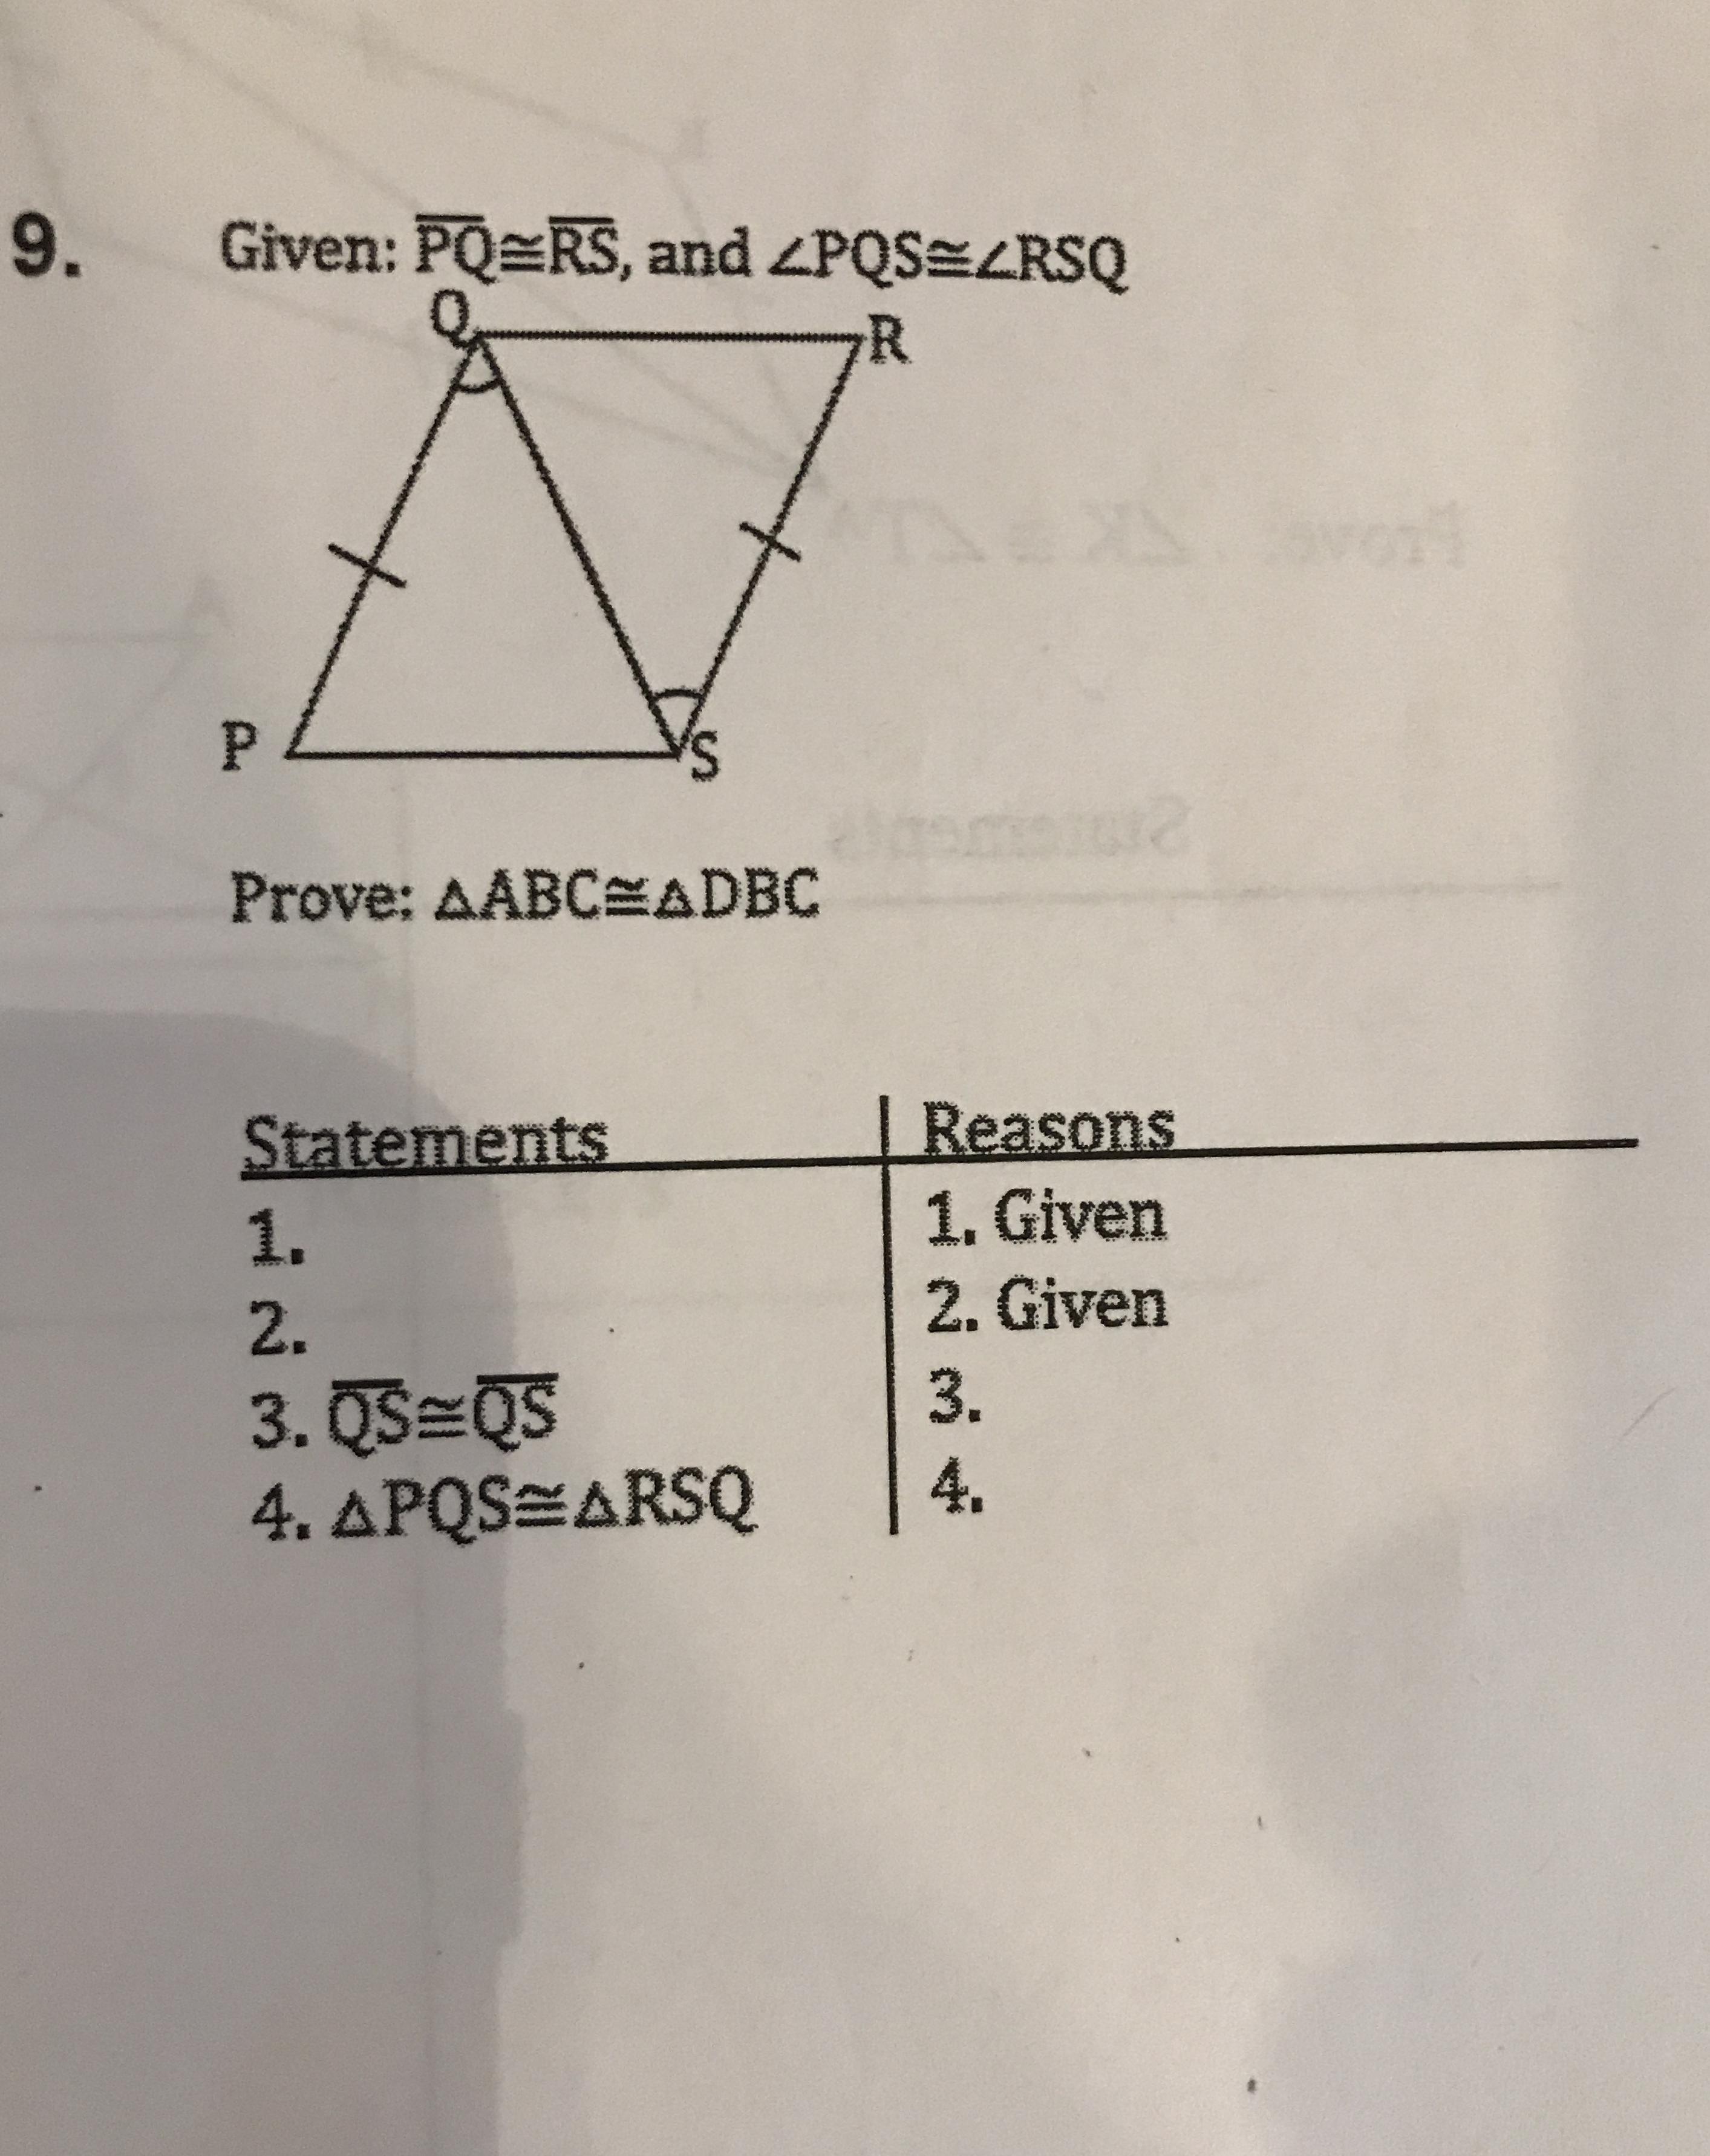 Given Math Overline Pq Cong Overline Rs Math And Math Angle Pqs Cong Angle Rsq Math Prove Math Triangle Abc Cong Triangle Dbc Math Math Begin Array L L Text Statements Text Reasons Hline 1 1 Text Given 2 2 Text